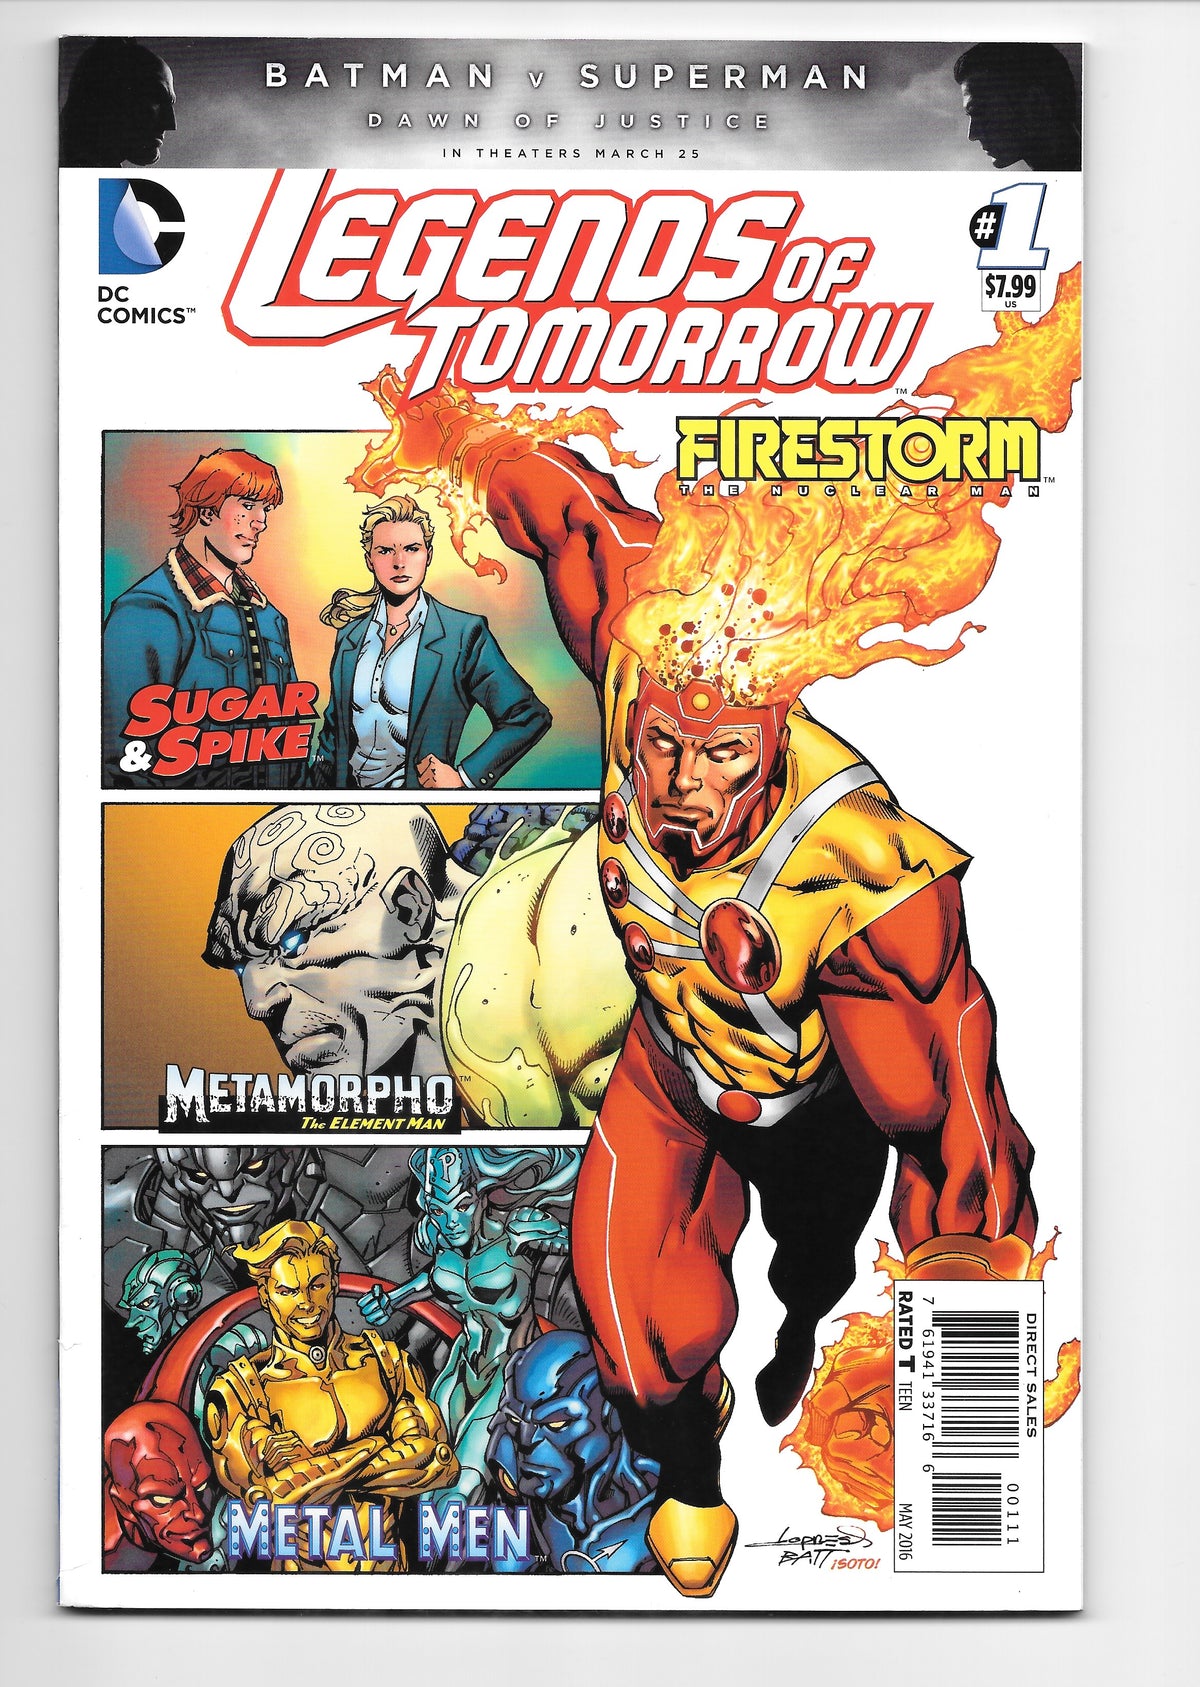 Photo of Legends of Tomorrow Issue 1 comic sold by Stronghold Collectibles